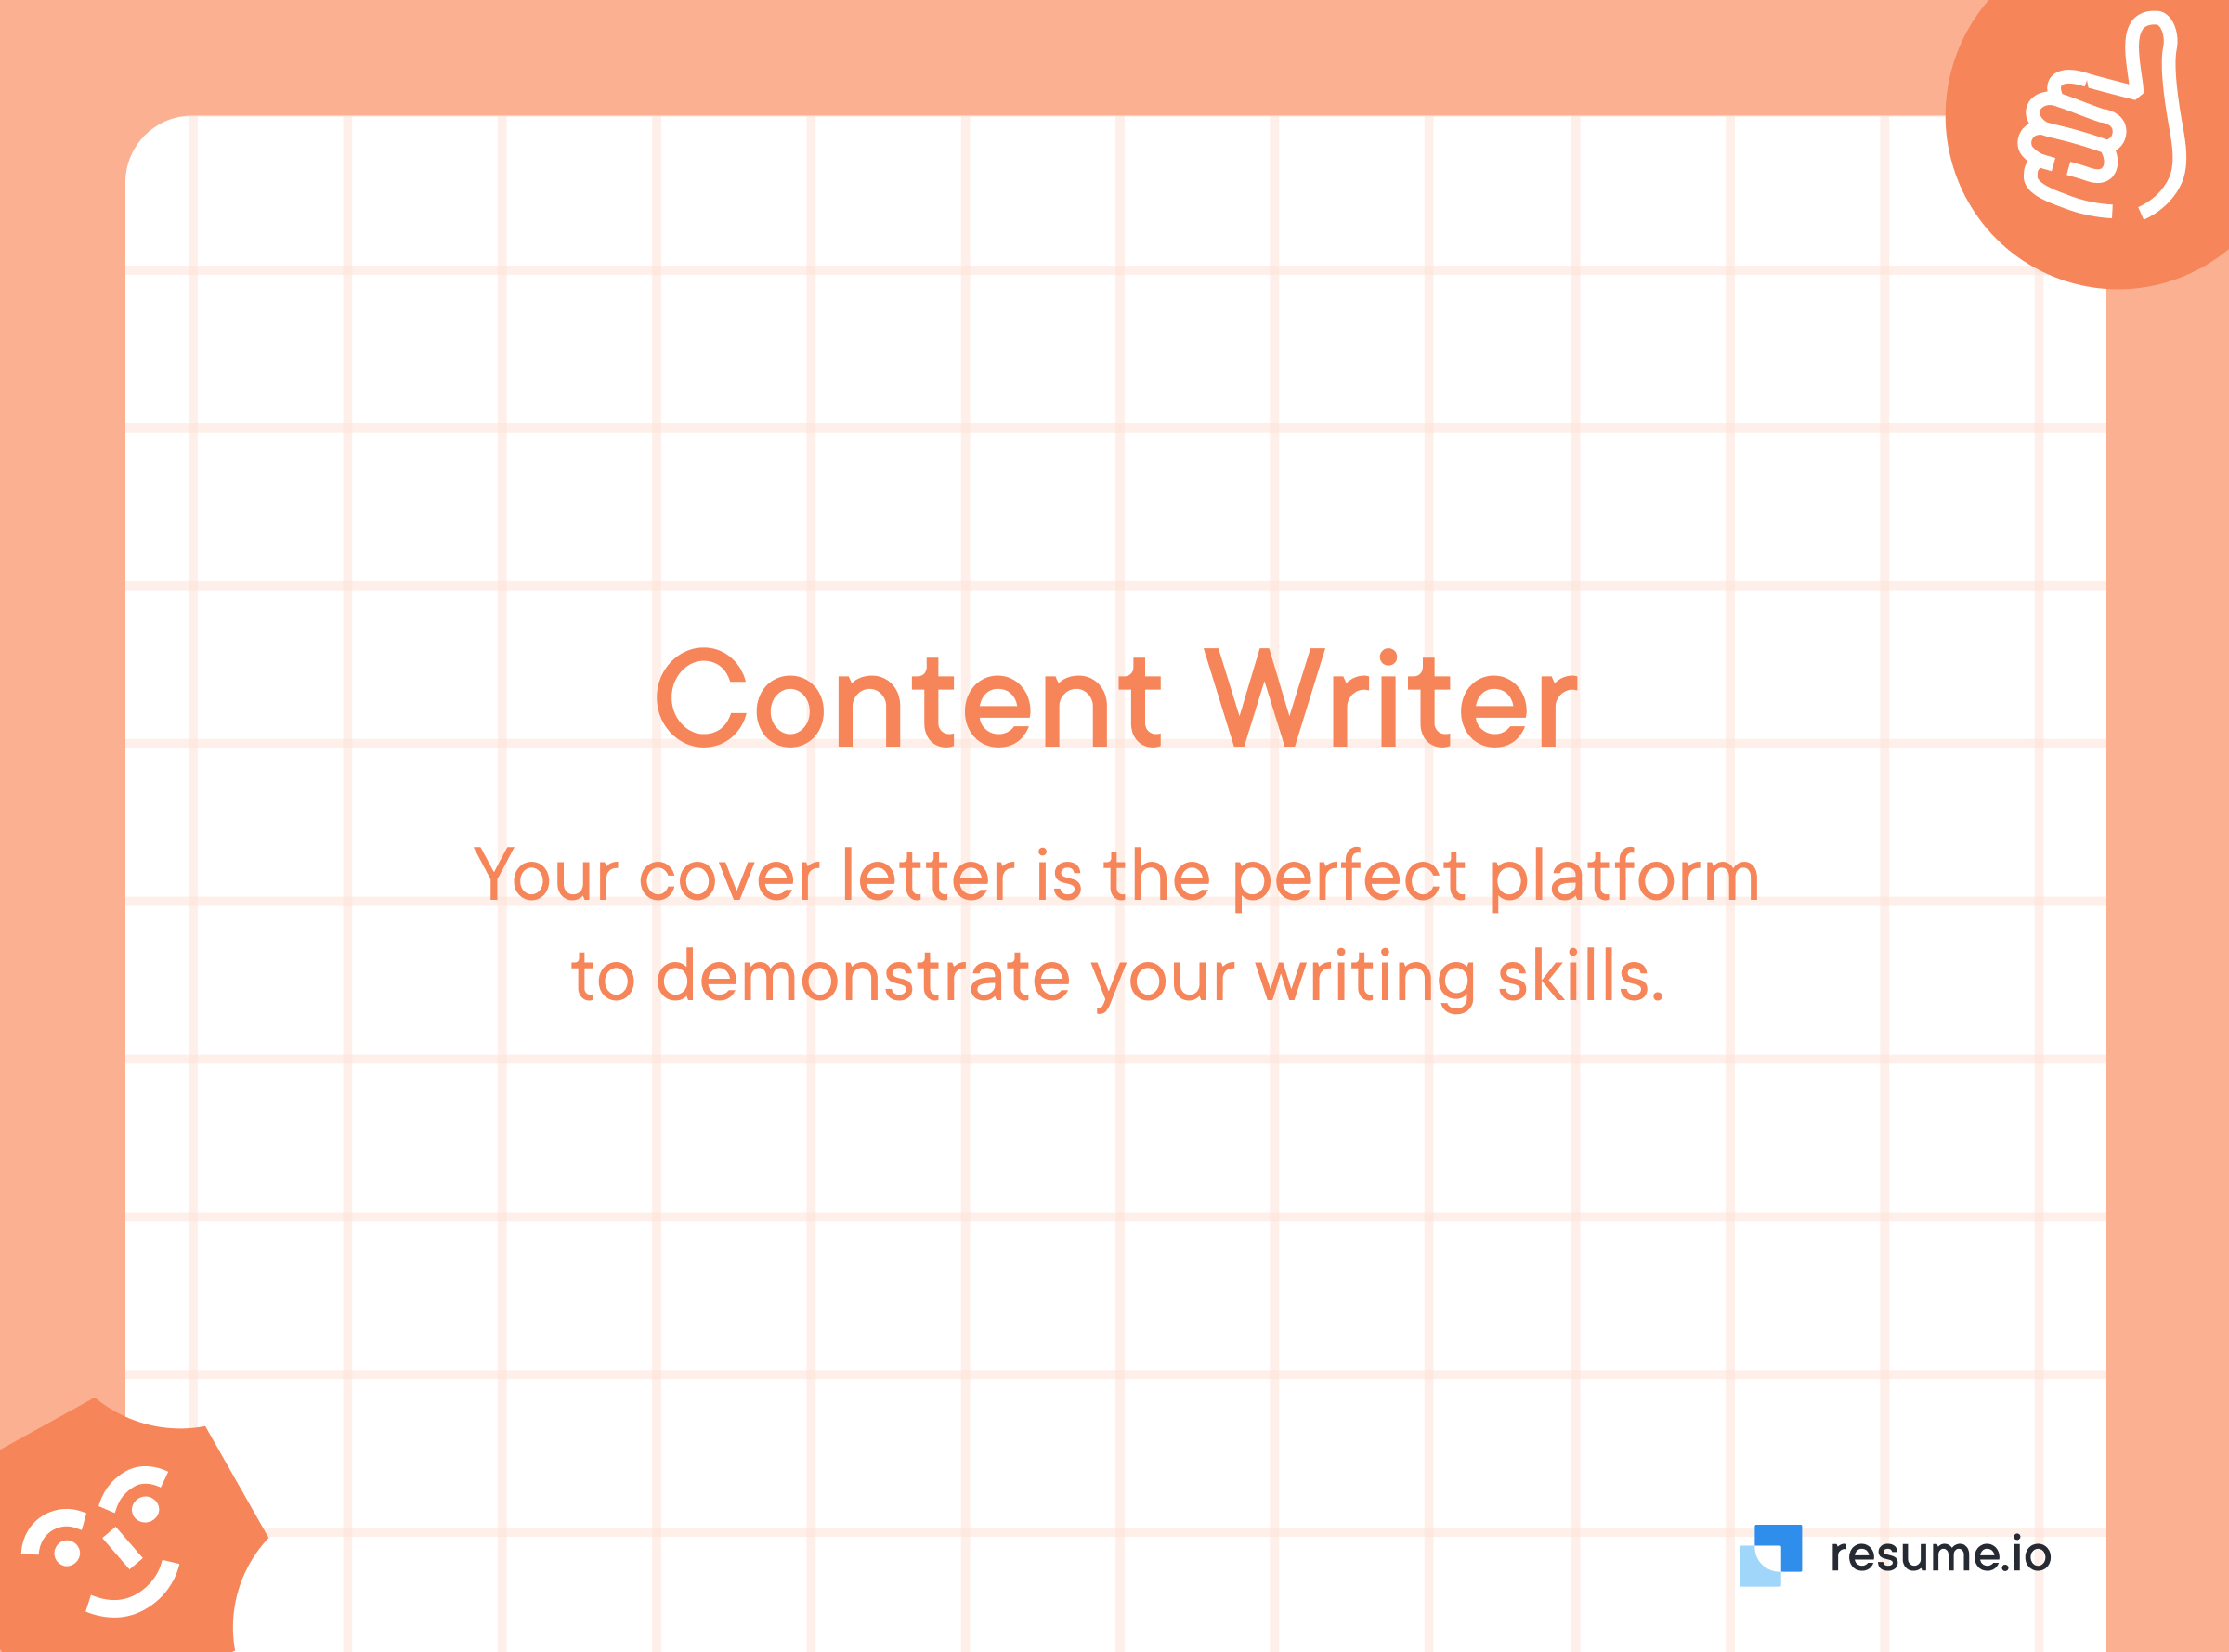 As a content writer, your cover letter is the perfect platform to demonstrate your writing skills. 